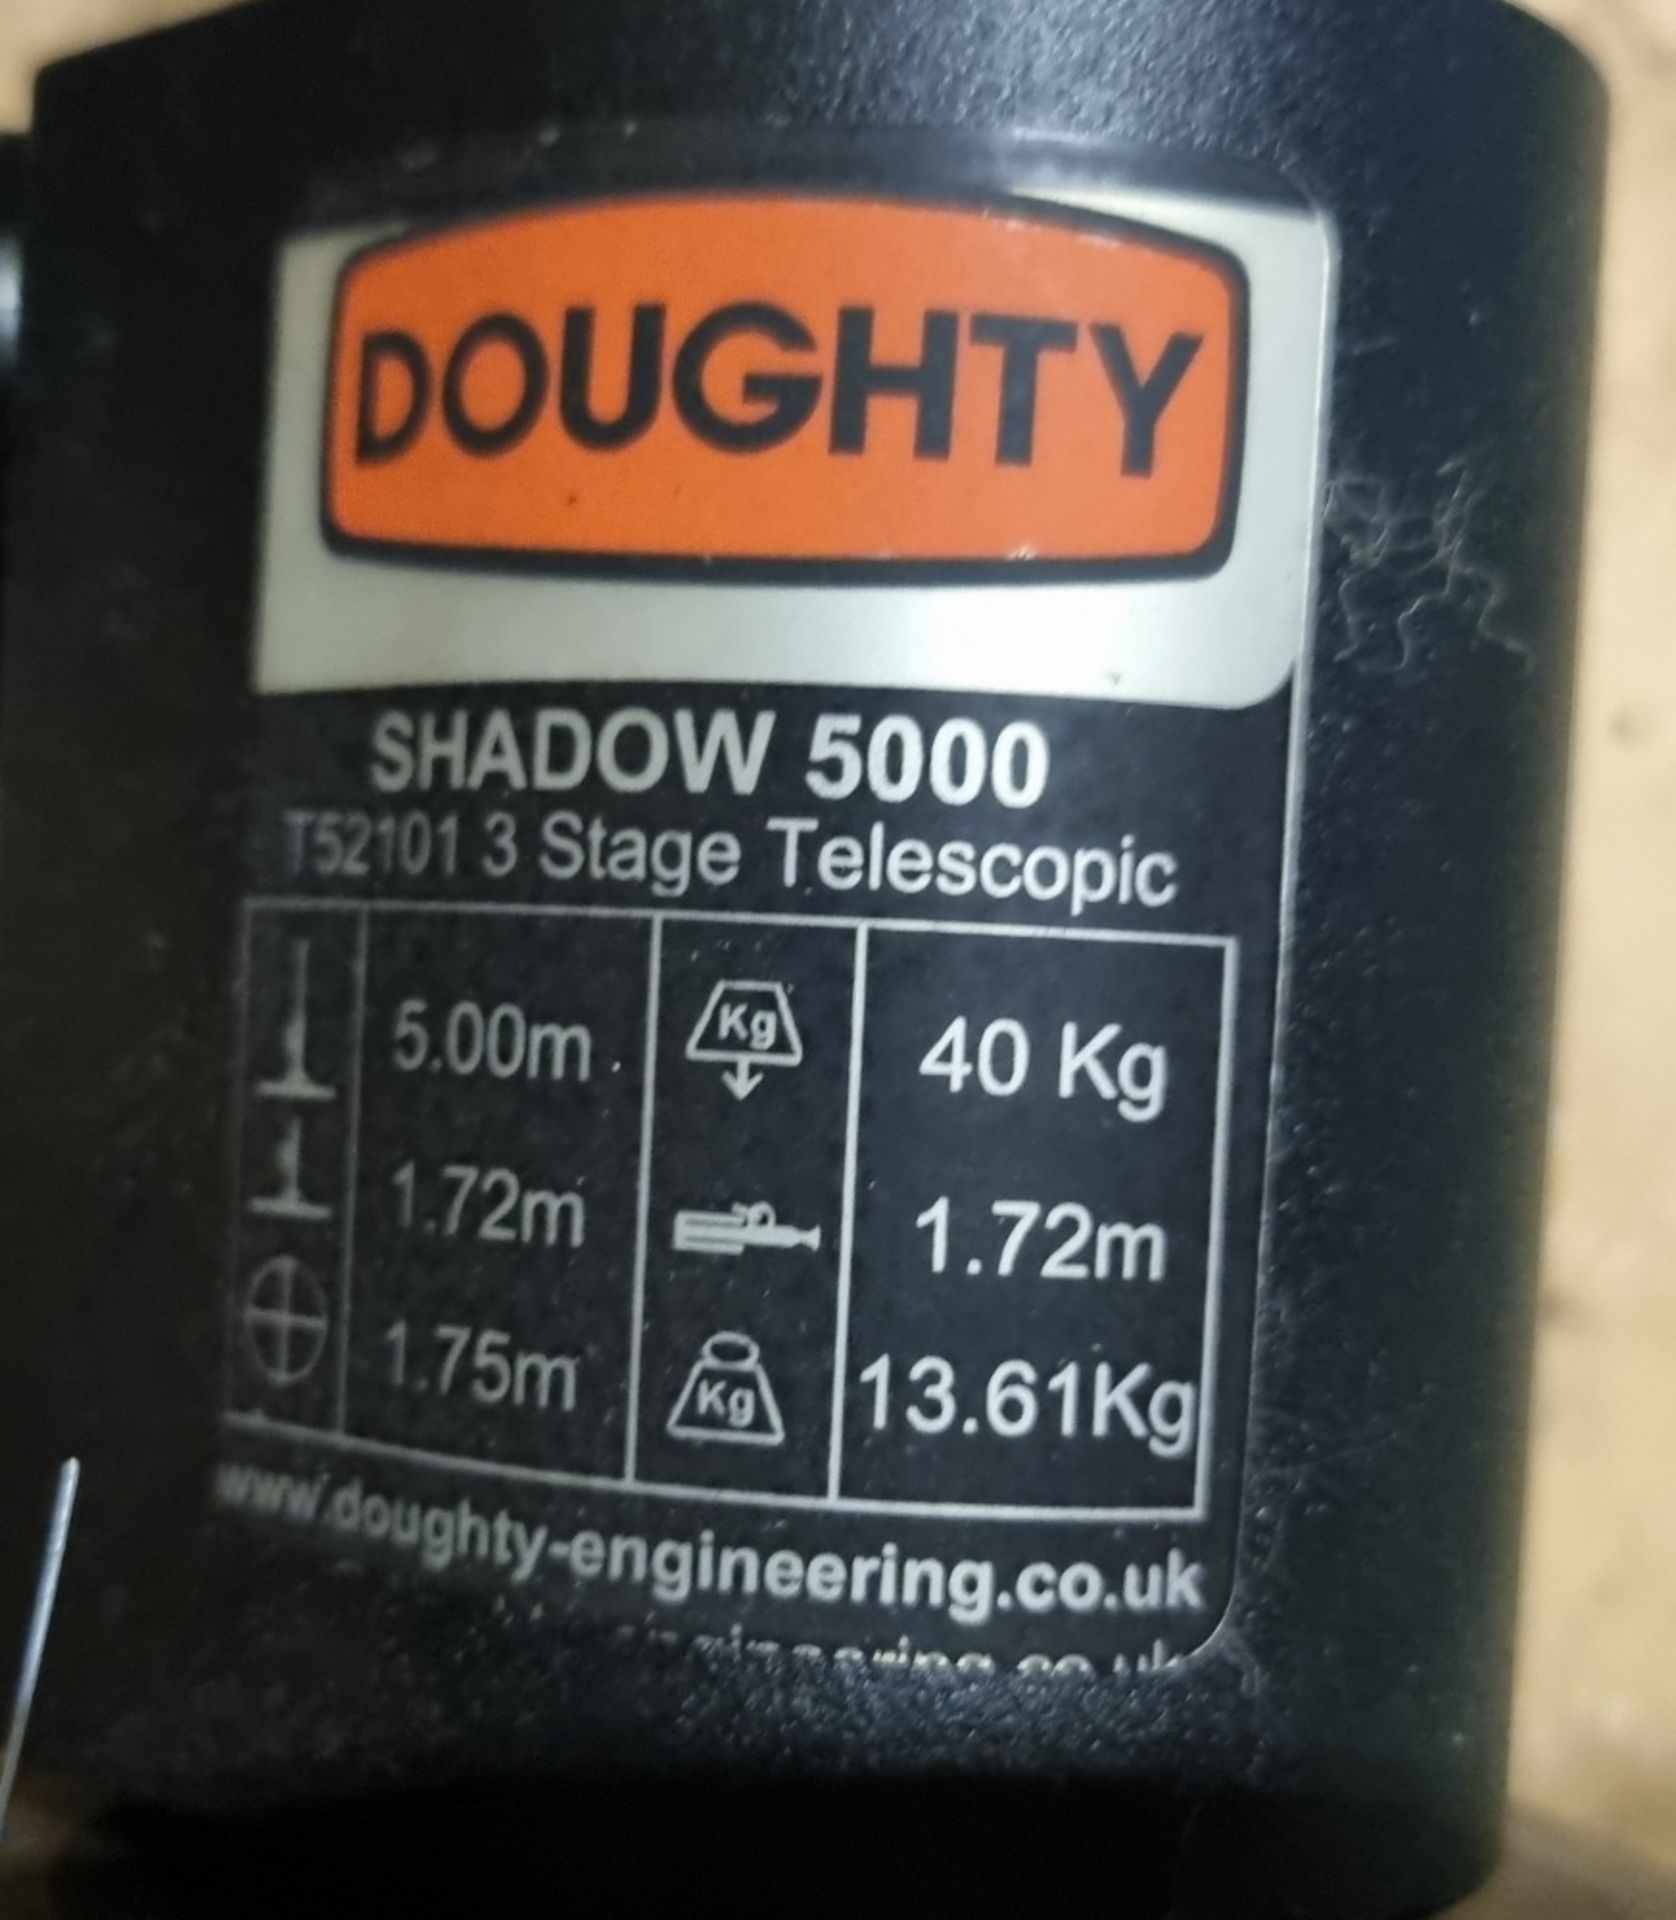 2x Doughty T52101, Shadow 5000 3 Section Stands - L1.75 x W1.75 x H1.72 - Image 3 of 3